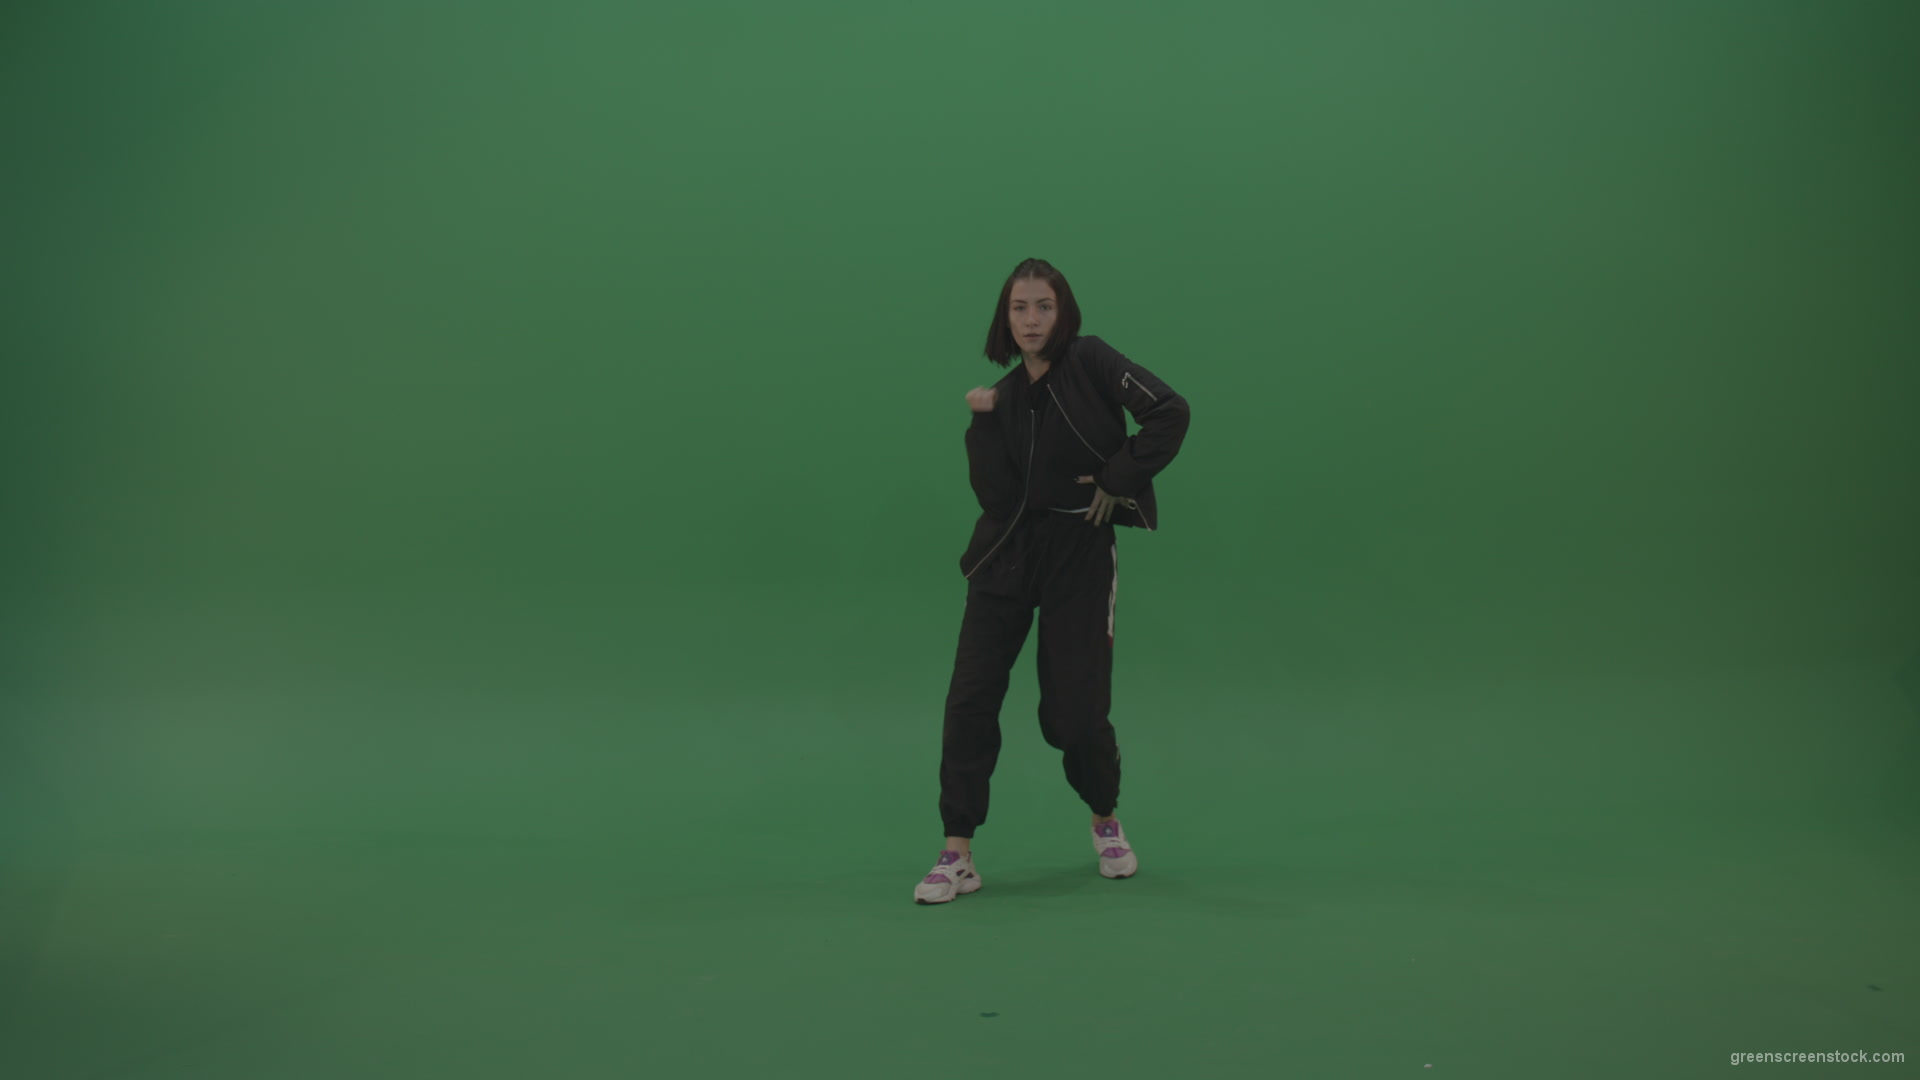 Incredible_Dance_Hip_Hop_Moves_From_Young_Brunette_Female_Wearing_Black_Sweat_Suite_And_White_Trainers_On_Green_Screen_Wall_Background_007 Green Screen Stock